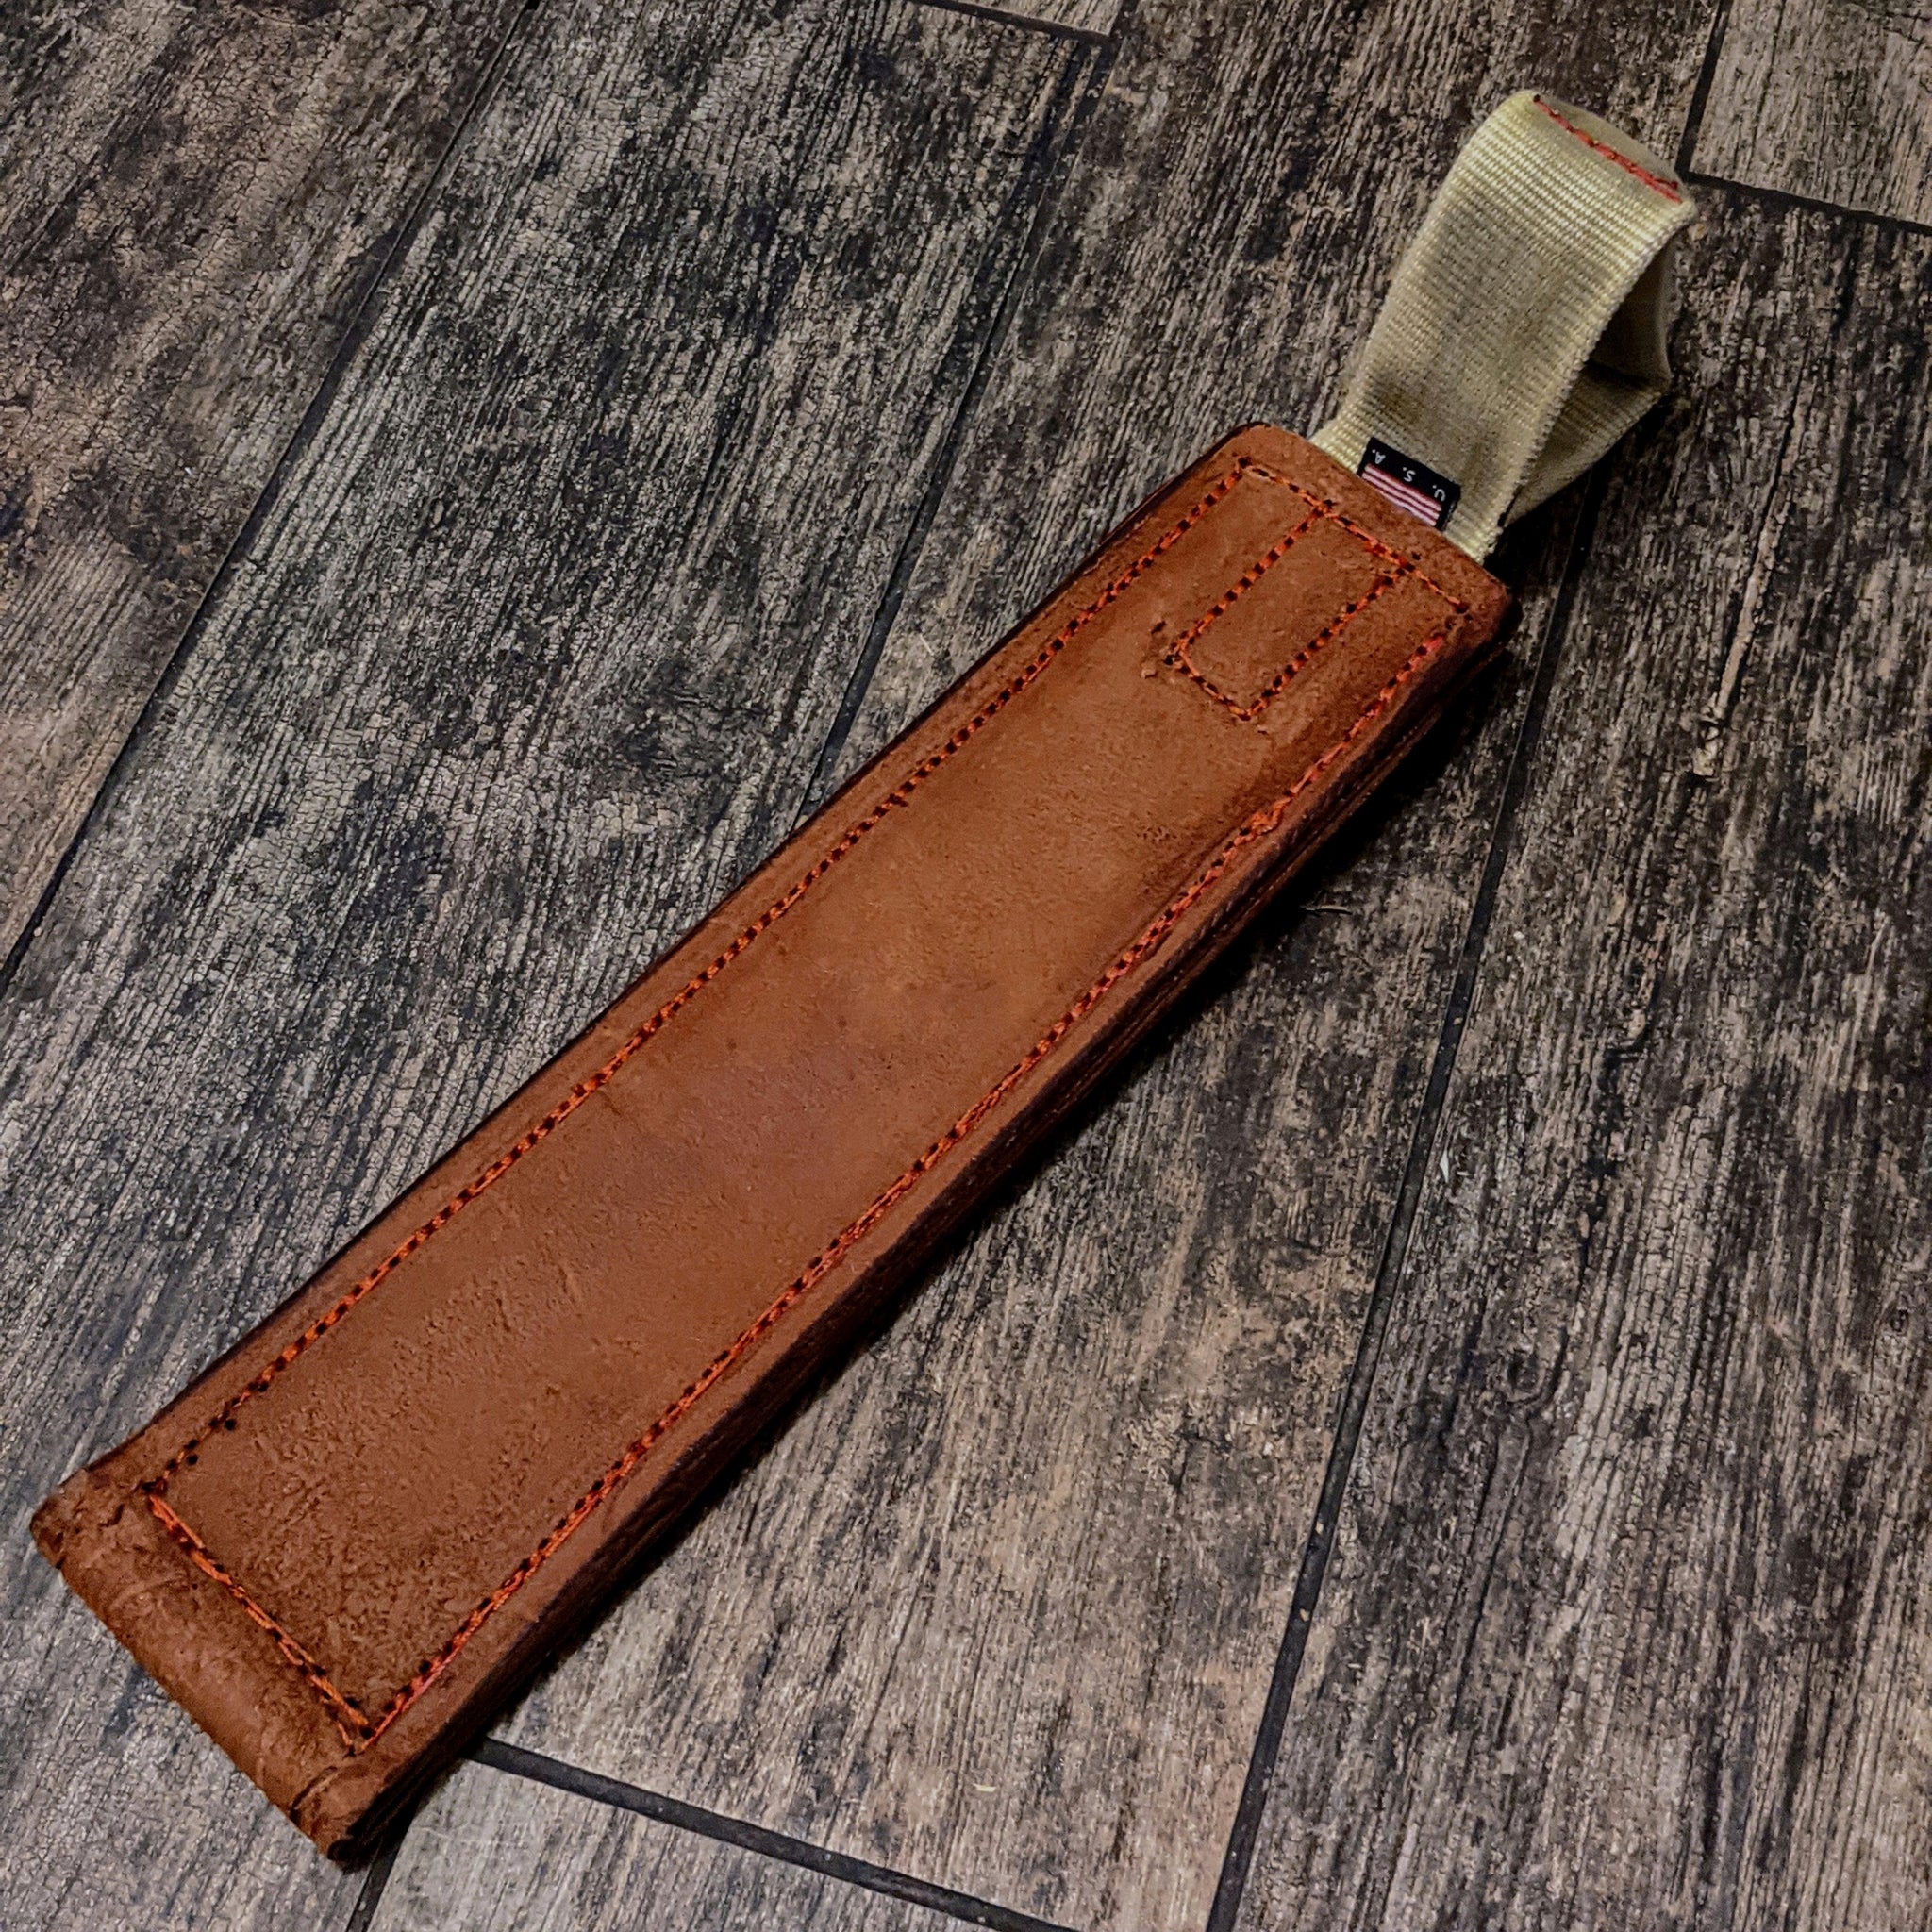 14/15 oz Leather dog tug with repurposed firehose handle,